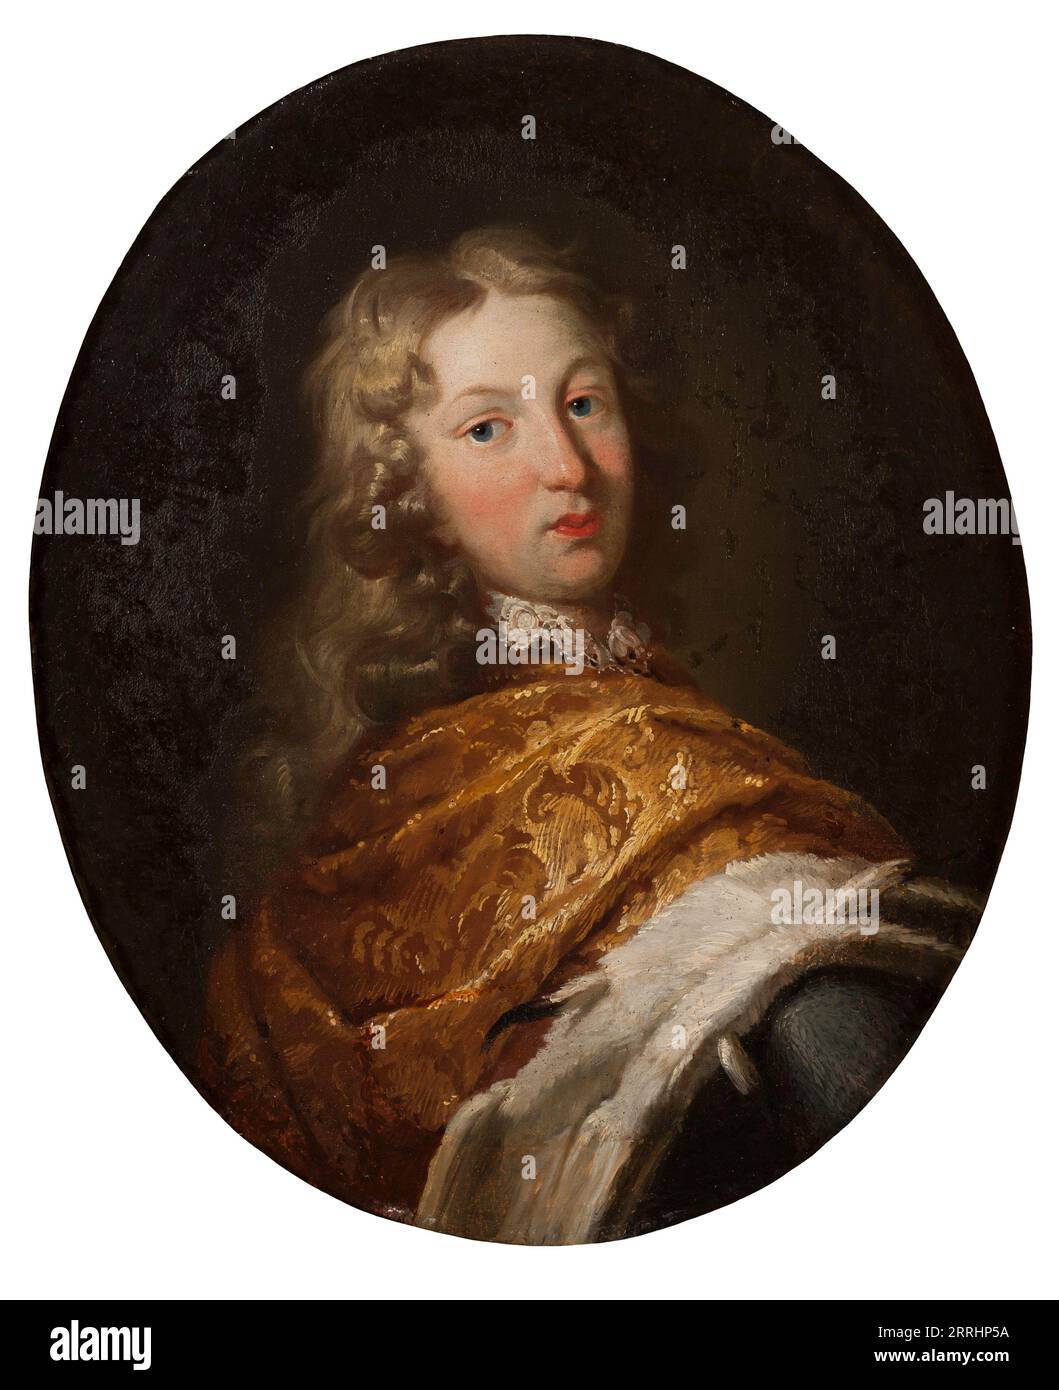 Charles III Guillaume (1679-1738) Margrave de Bade-Durlach, 1696. Banque D'Images